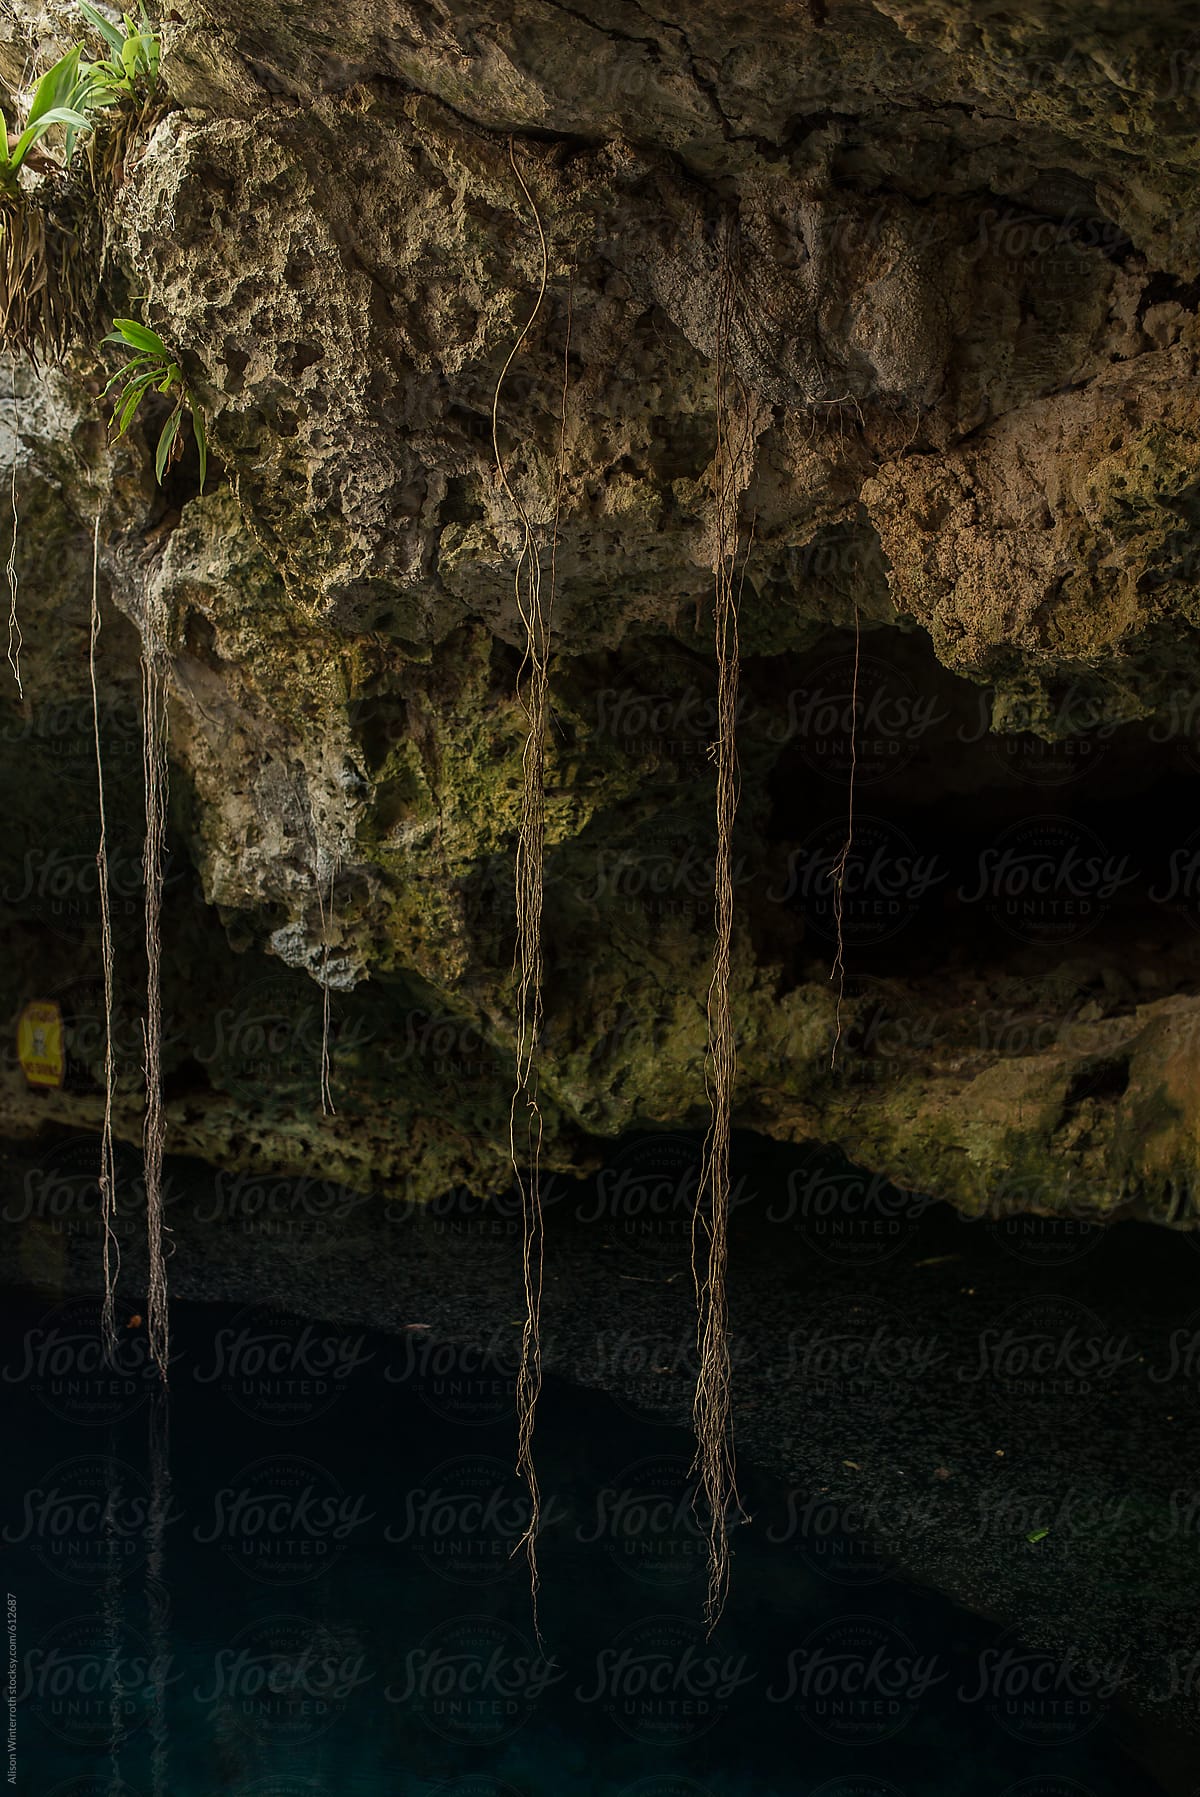 Roots Hang From Limestone Cave Ceiling